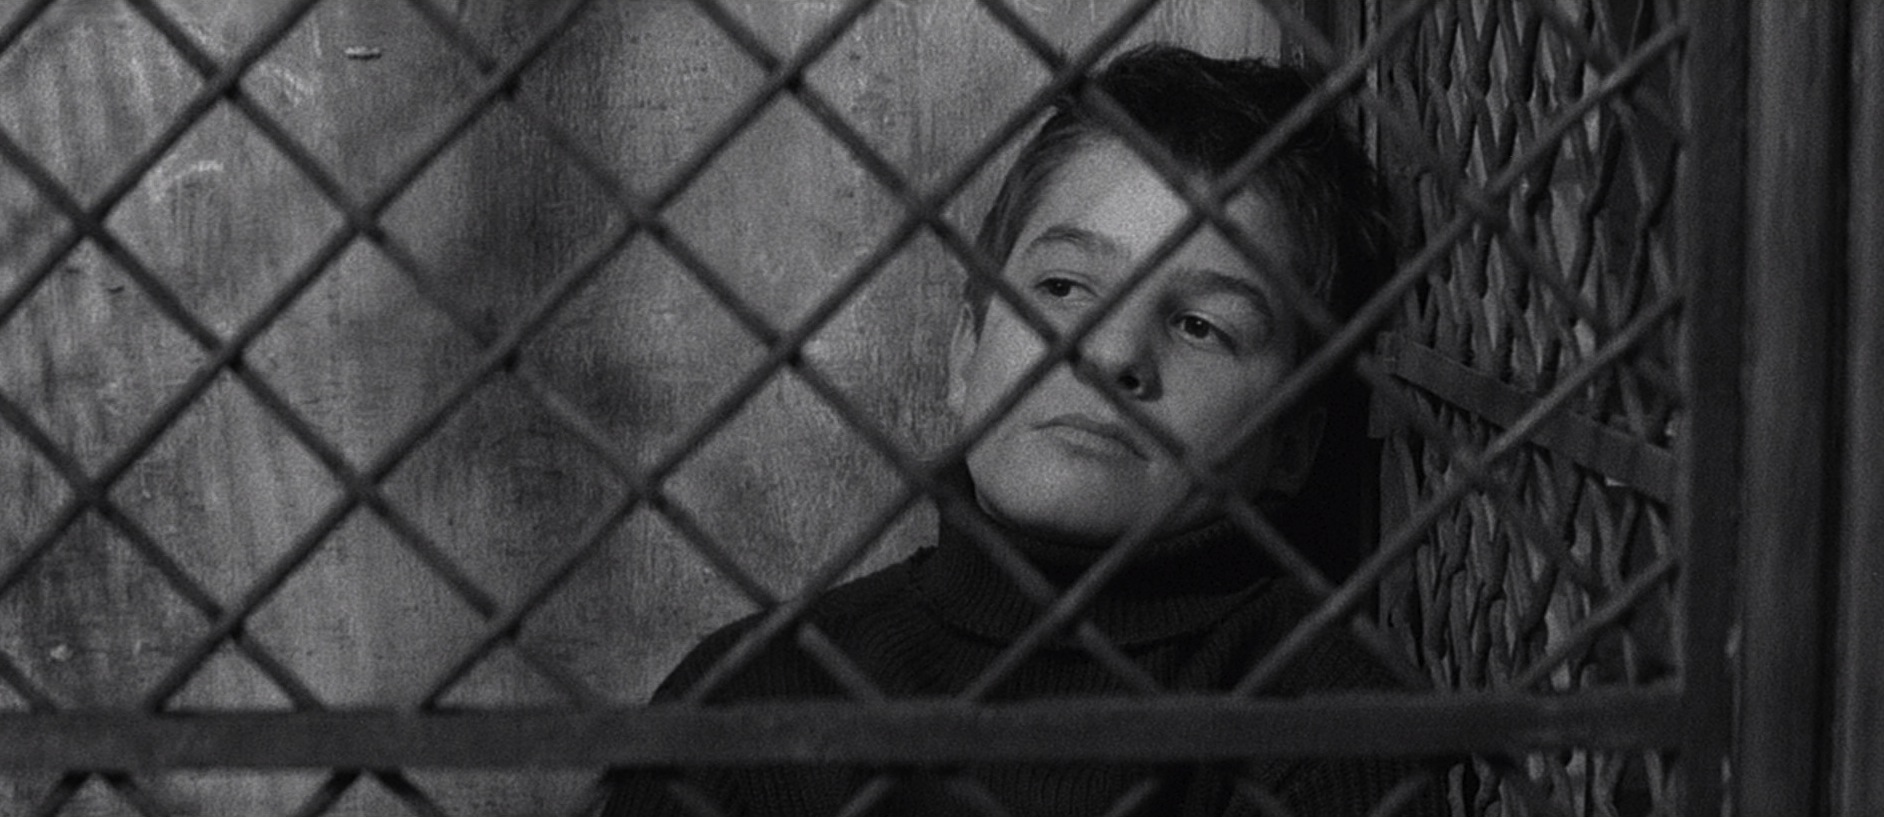 The 400 Blows movie